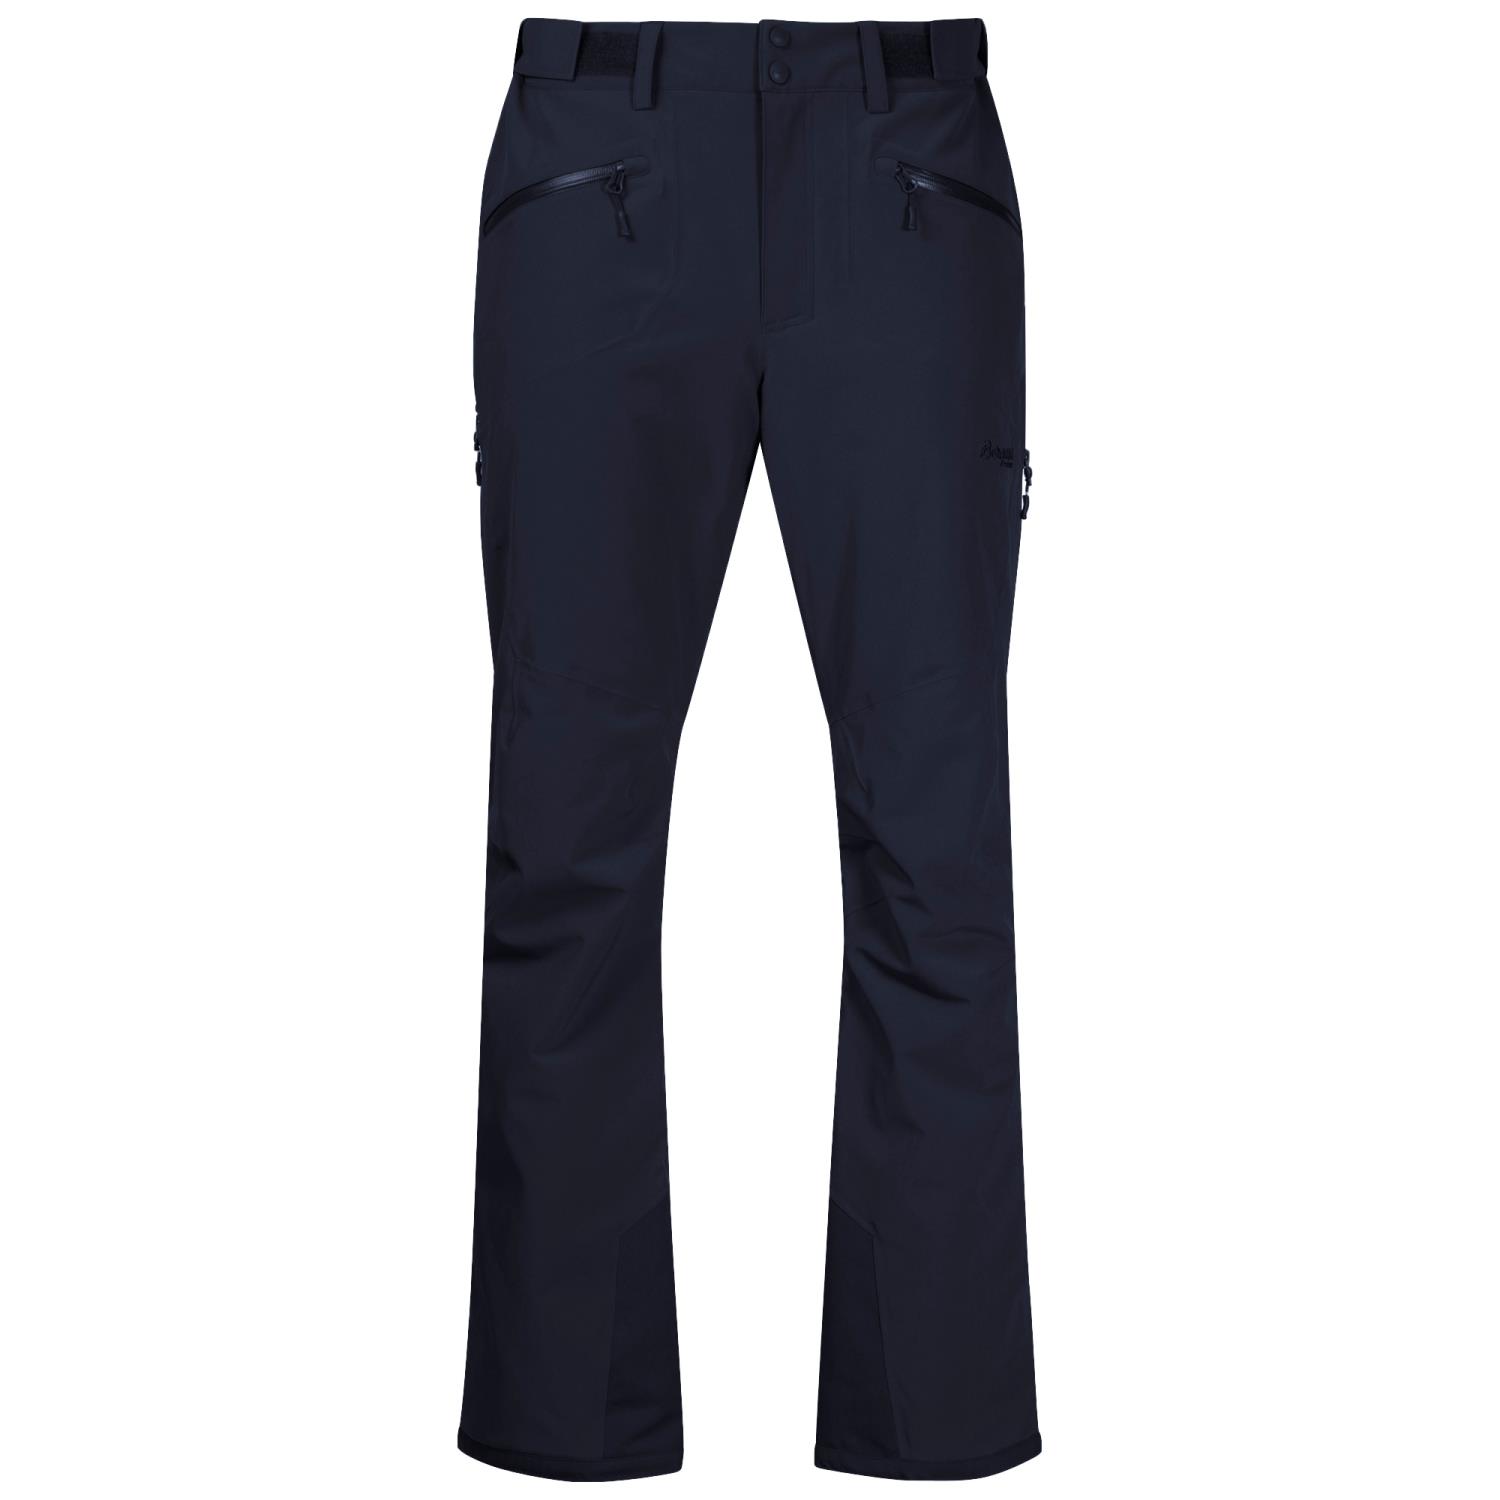 Oppdal insulated pants herre